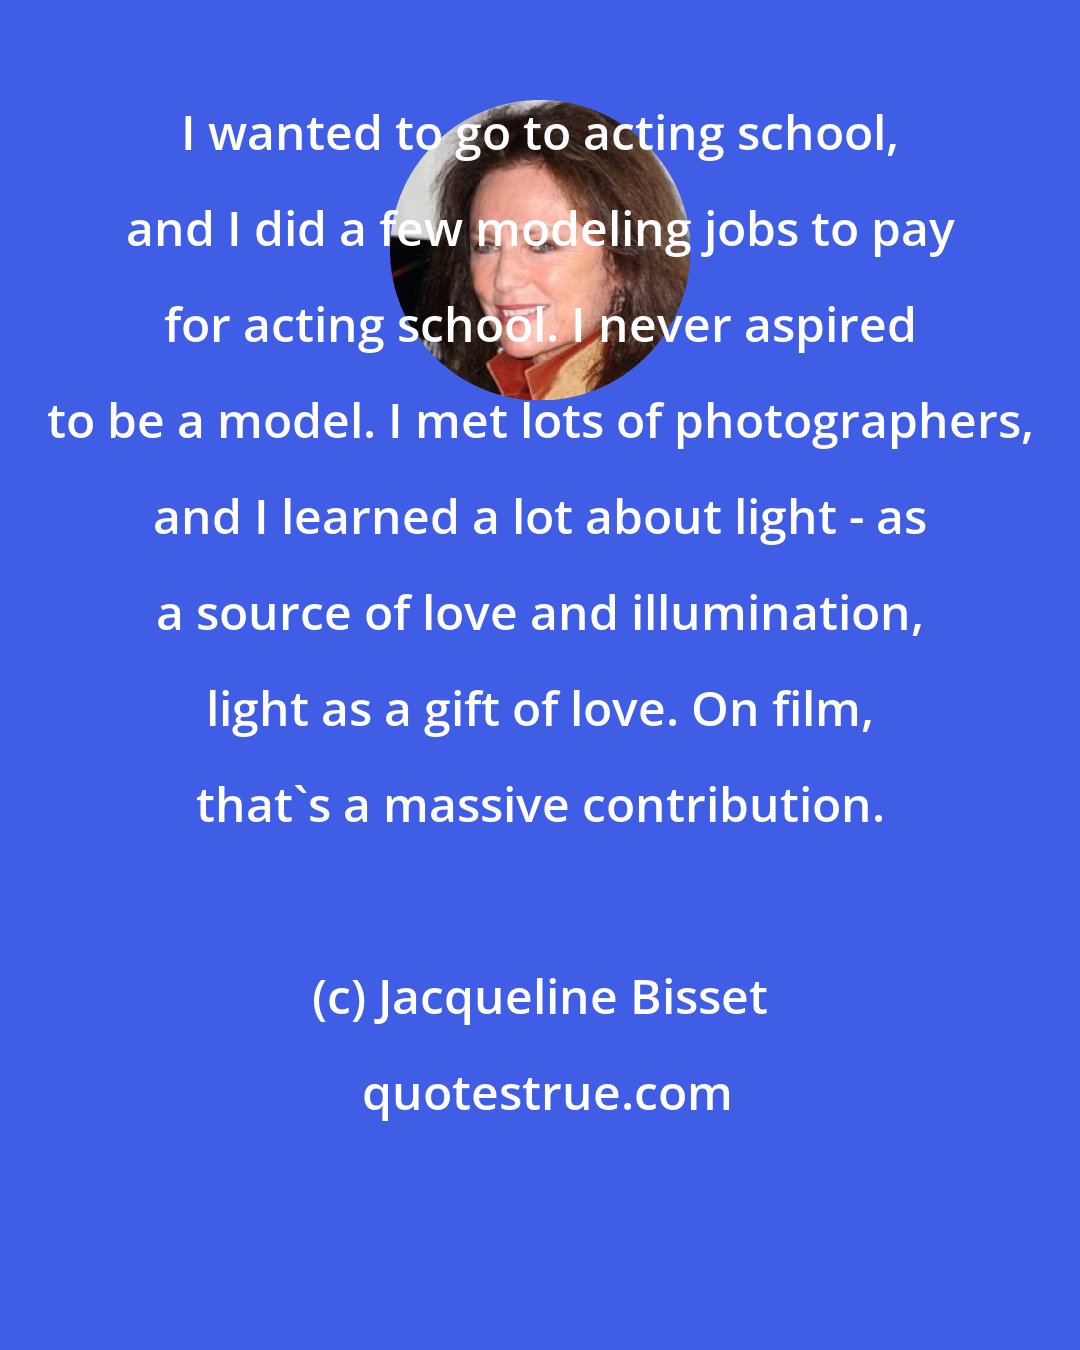 Jacqueline Bisset: I wanted to go to acting school, and I did a few modeling jobs to pay for acting school. I never aspired to be a model. I met lots of photographers, and I learned a lot about light - as a source of love and illumination, light as a gift of love. On film, that's a massive contribution.